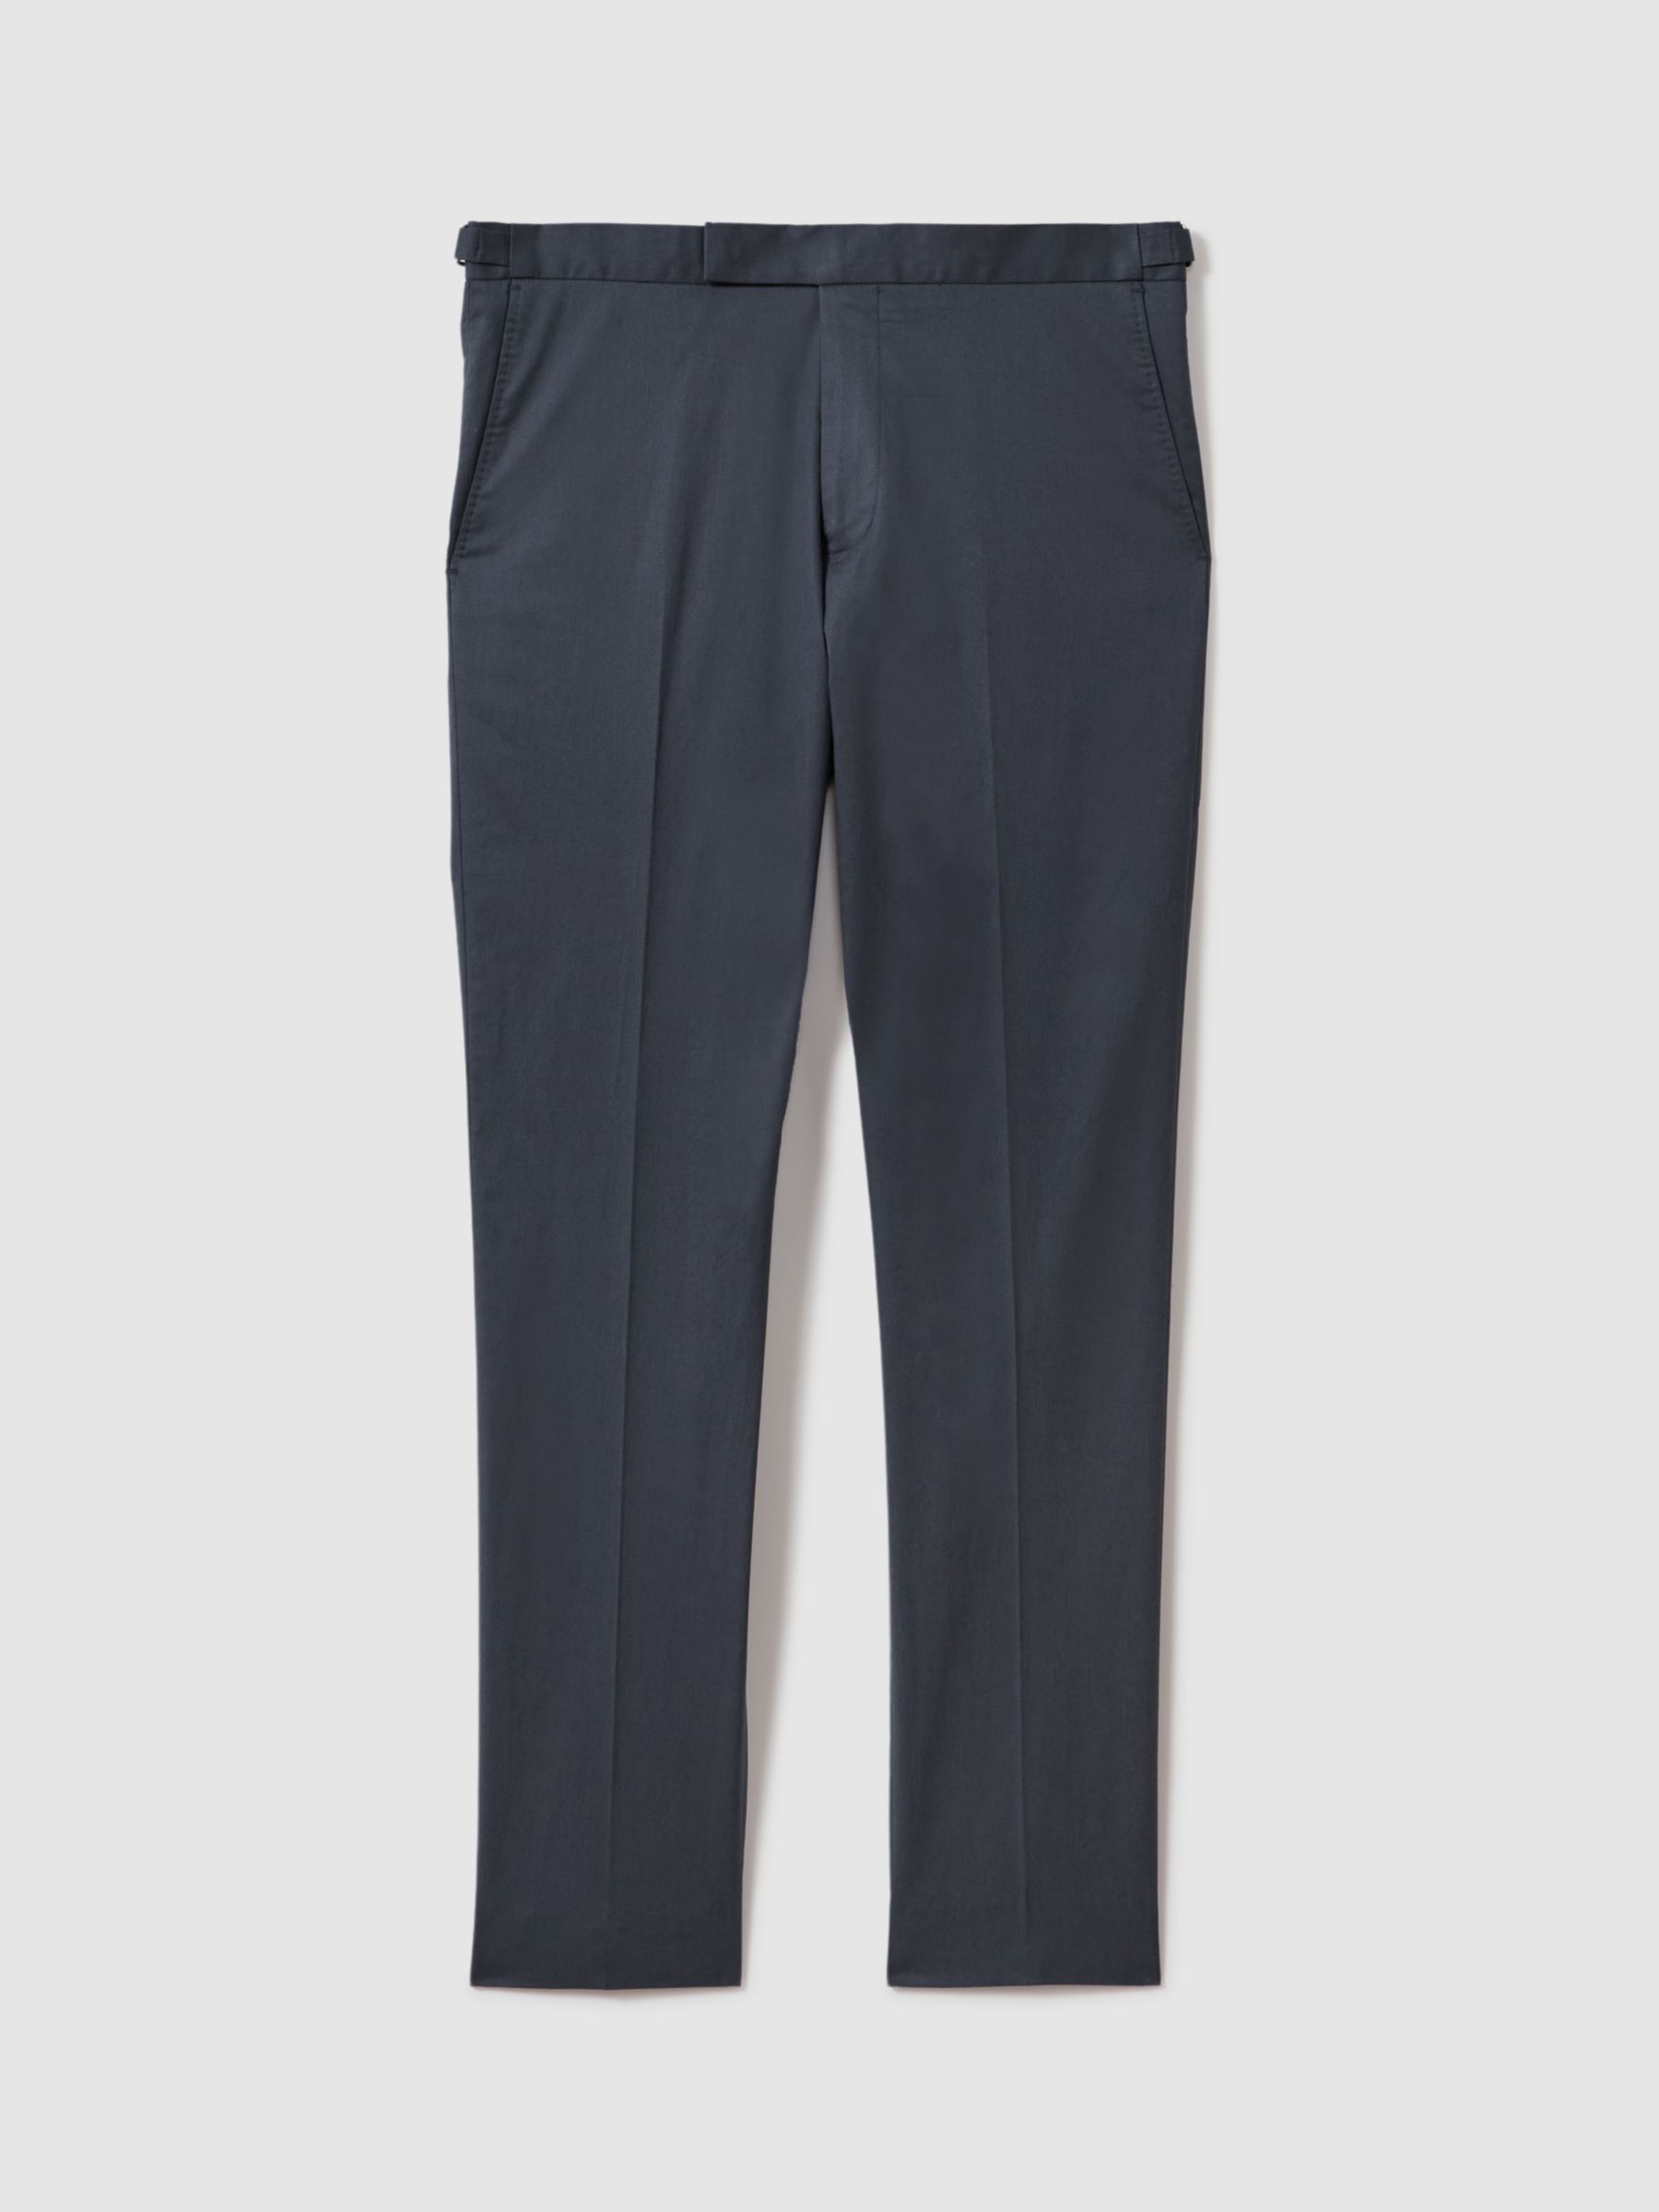 Reiss Crawford Trousers, Airforce Blue, 28R